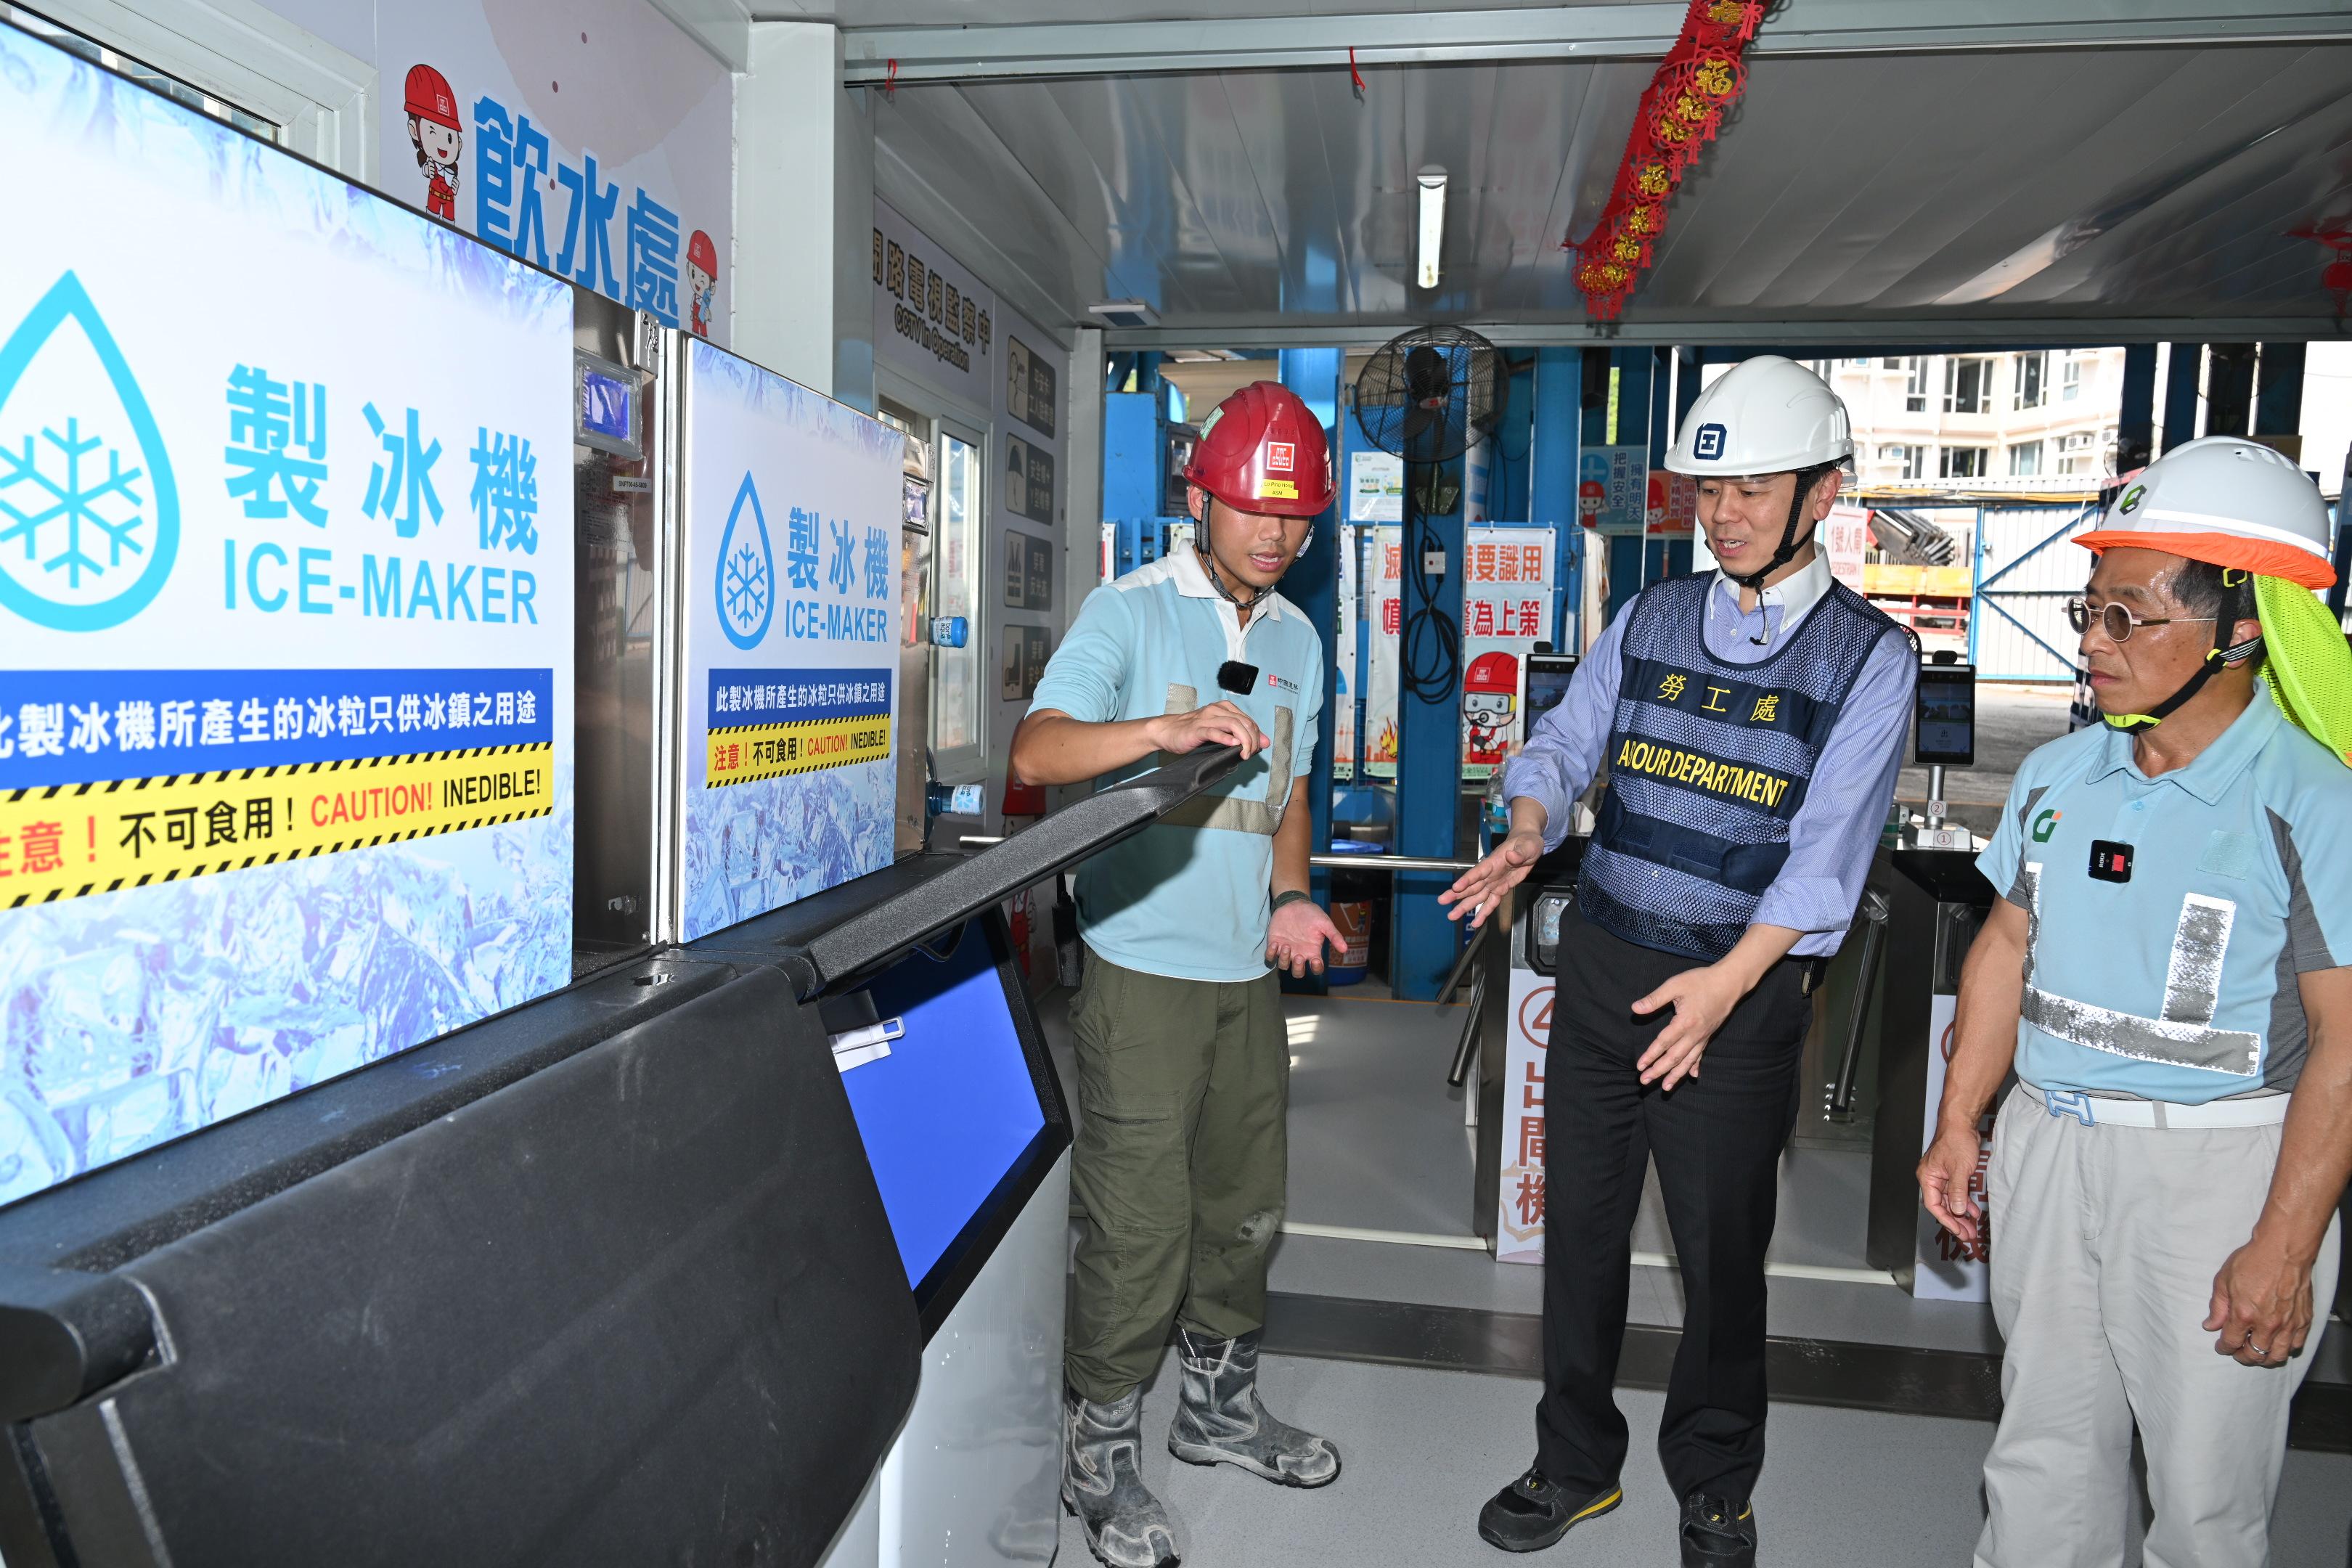 The Labour Department and representatives of the construction industry promoted prevention of heat stroke at work at a public works site in Tseung Kwan O today (June 9). Photo shows the Acting Commissioner for Labour, Mr Vincent Fung (centre), and the Chairman of the Construction Industry Council, Mr Thomas Ho (first right), having a look at the ice-maker at the construction site.

